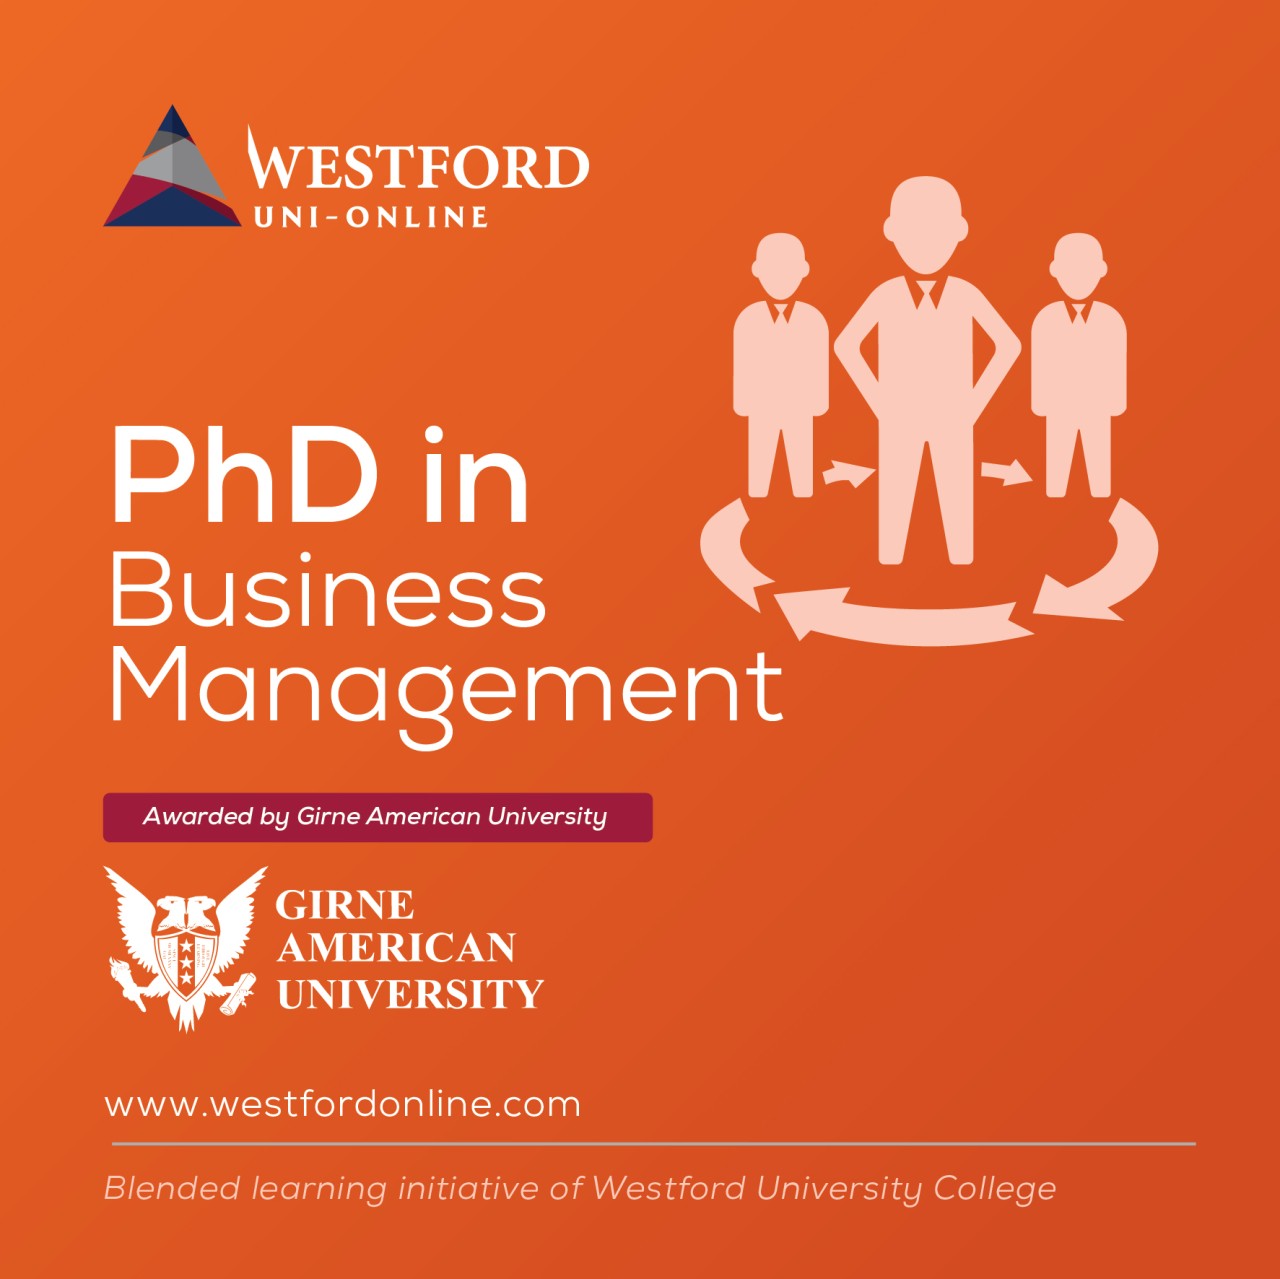 phd in business management pcu